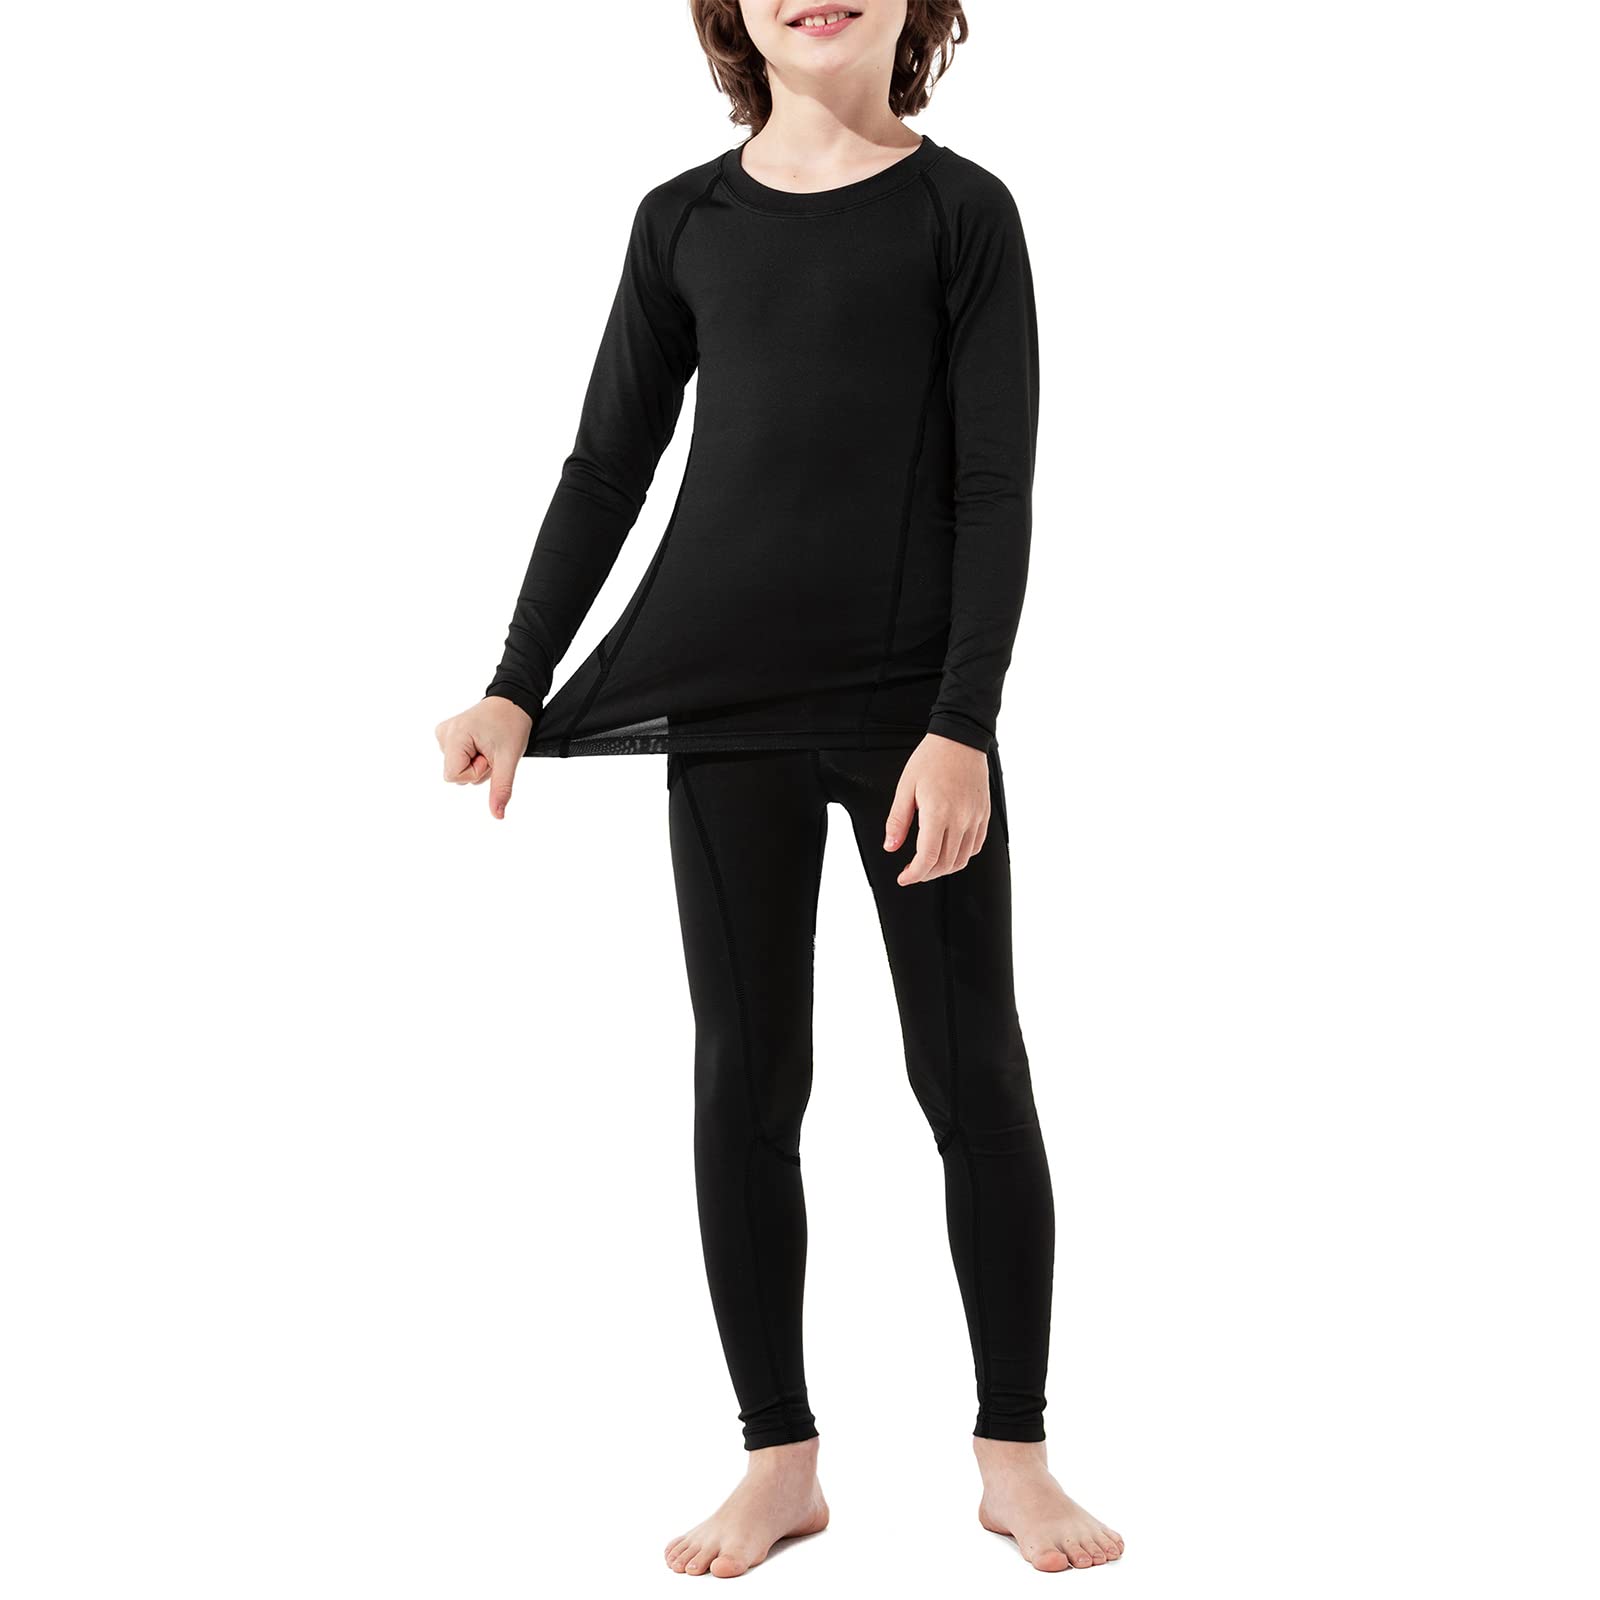 American Trends Youth Boys Long Sleeve Compression Shirts and Leggings Pants  Kids Thermal Underwear Set Base